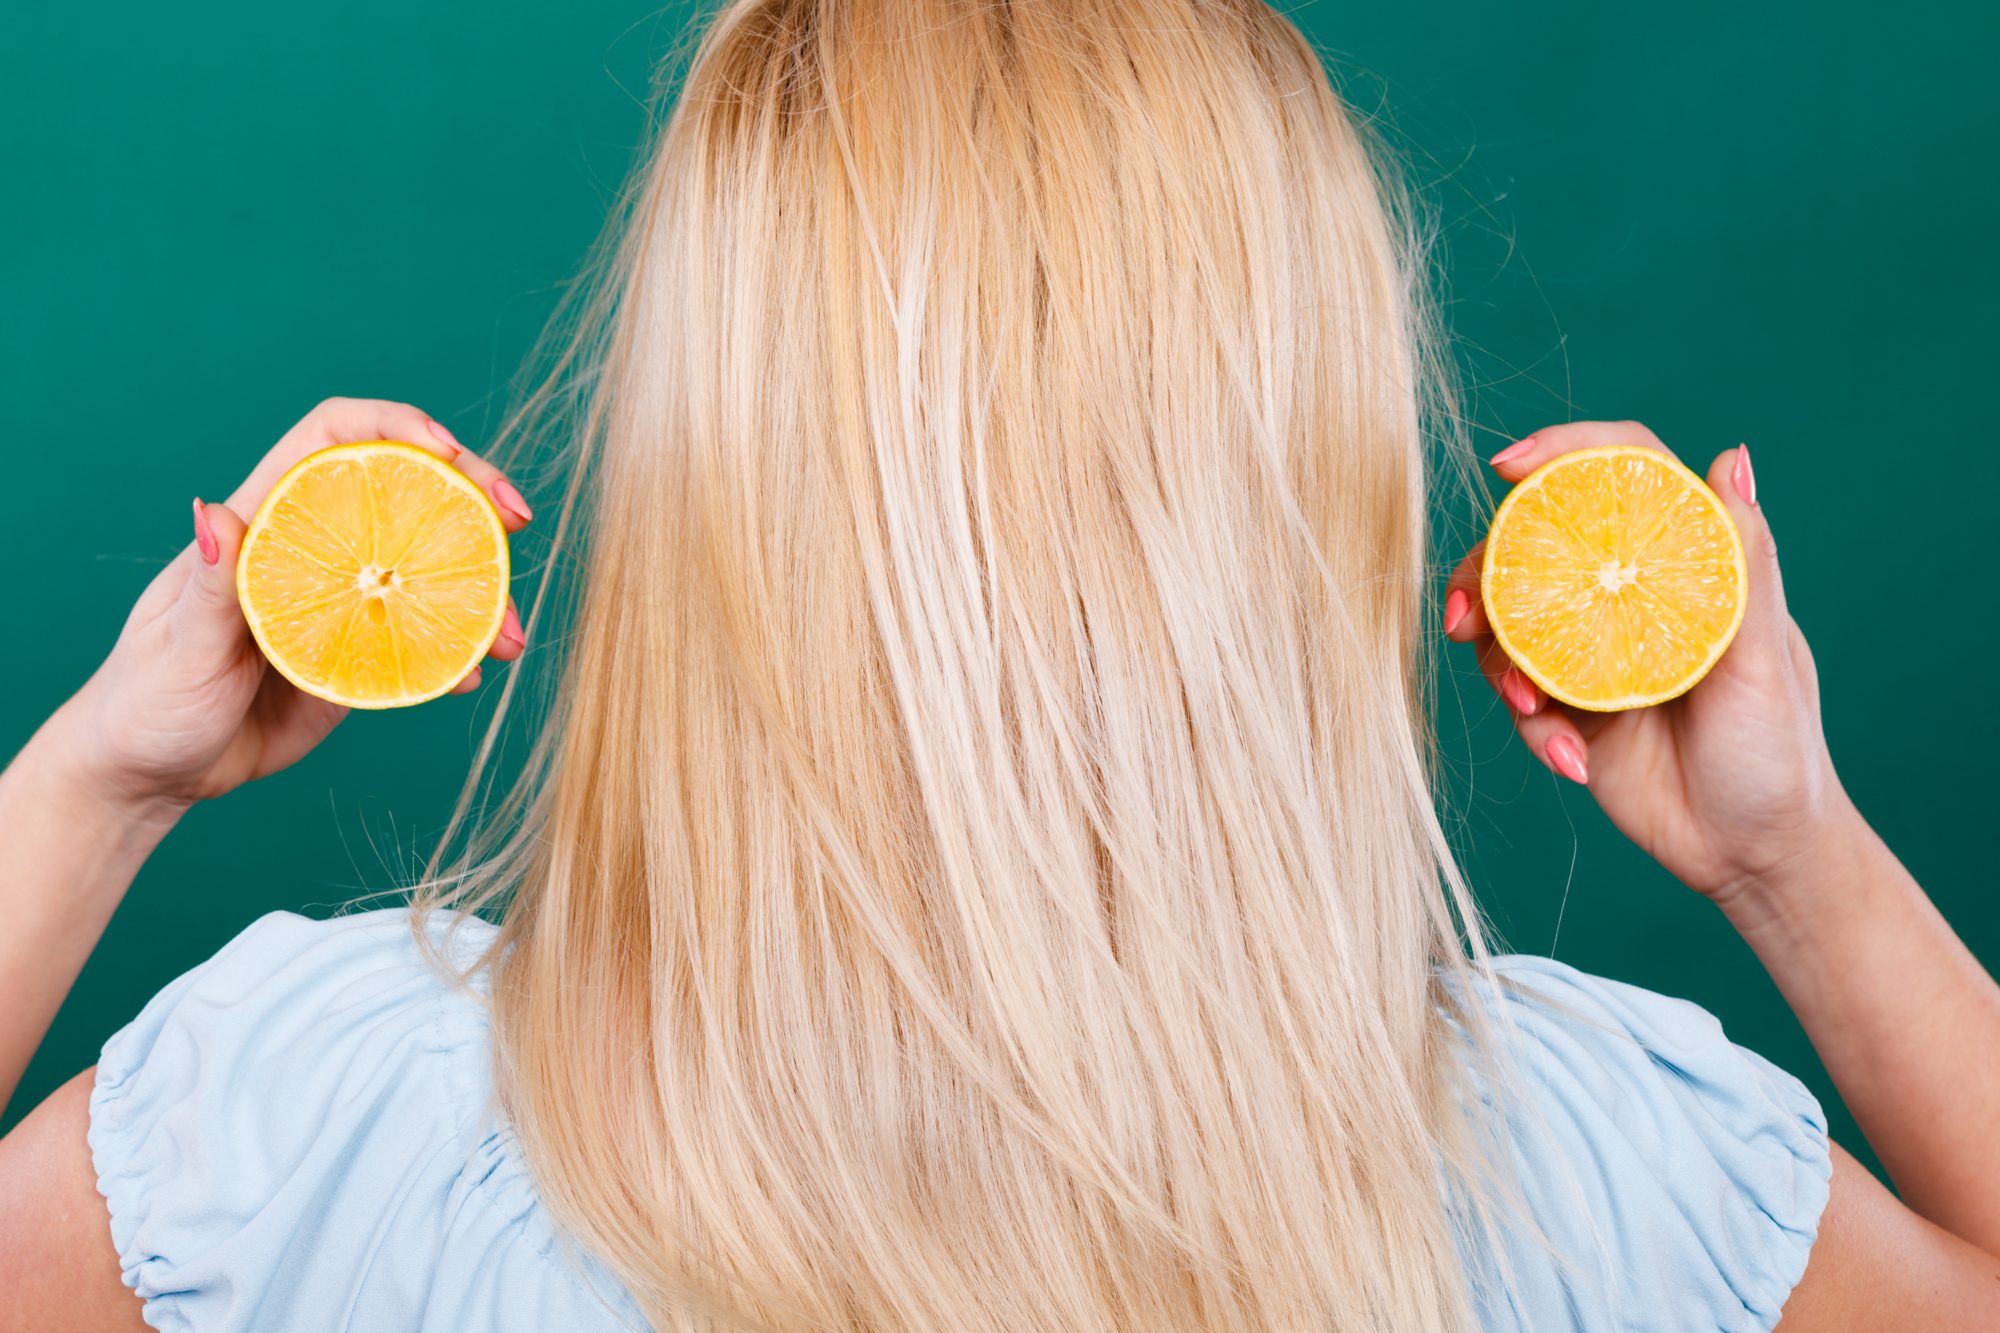 How to Lighten Hair Naturally, According to HairstylistsHelloGiggles